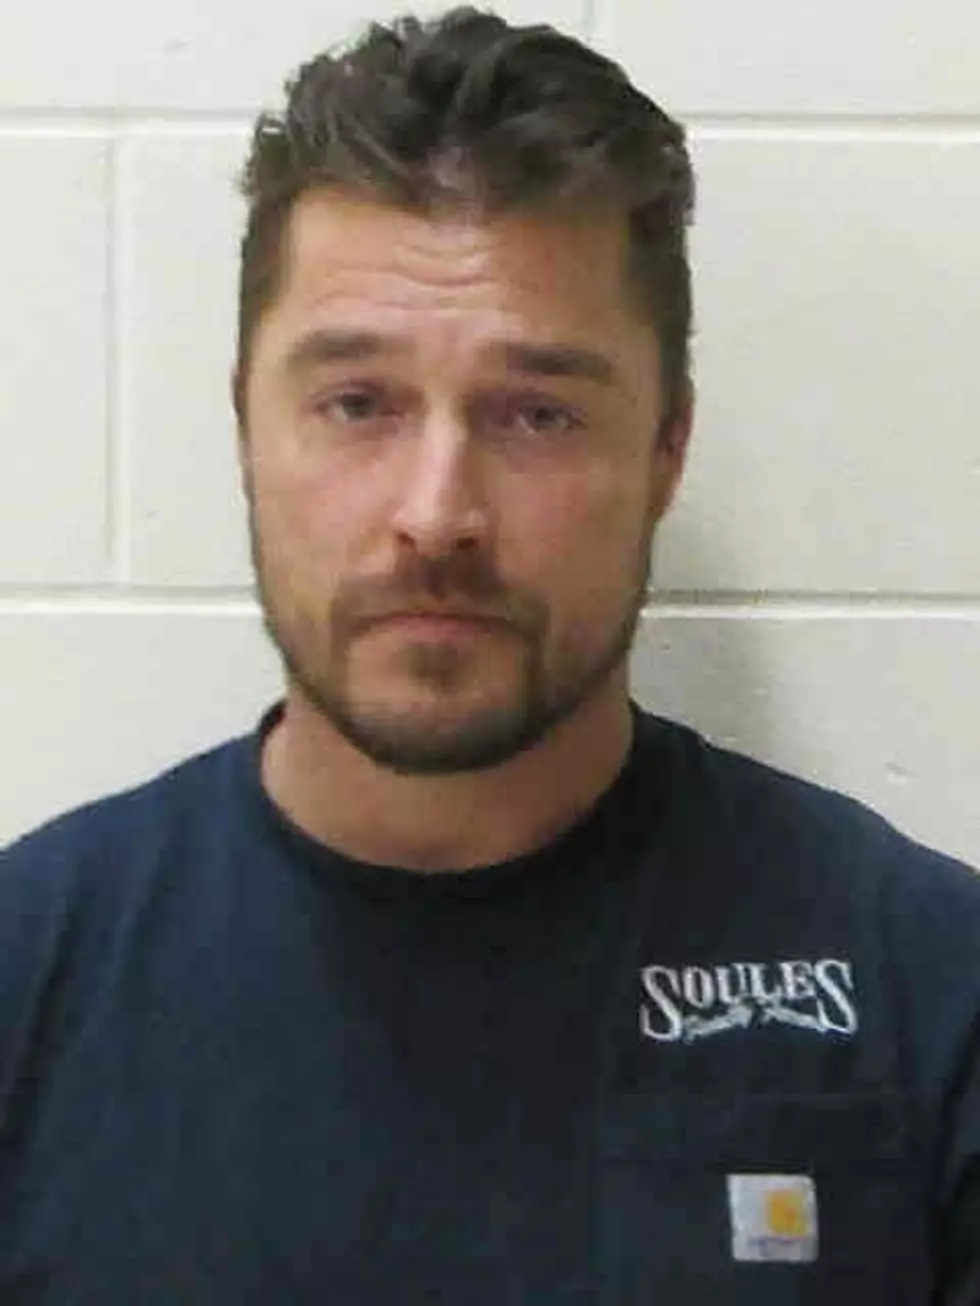 Soules Requests A Change Of Venue For Trial